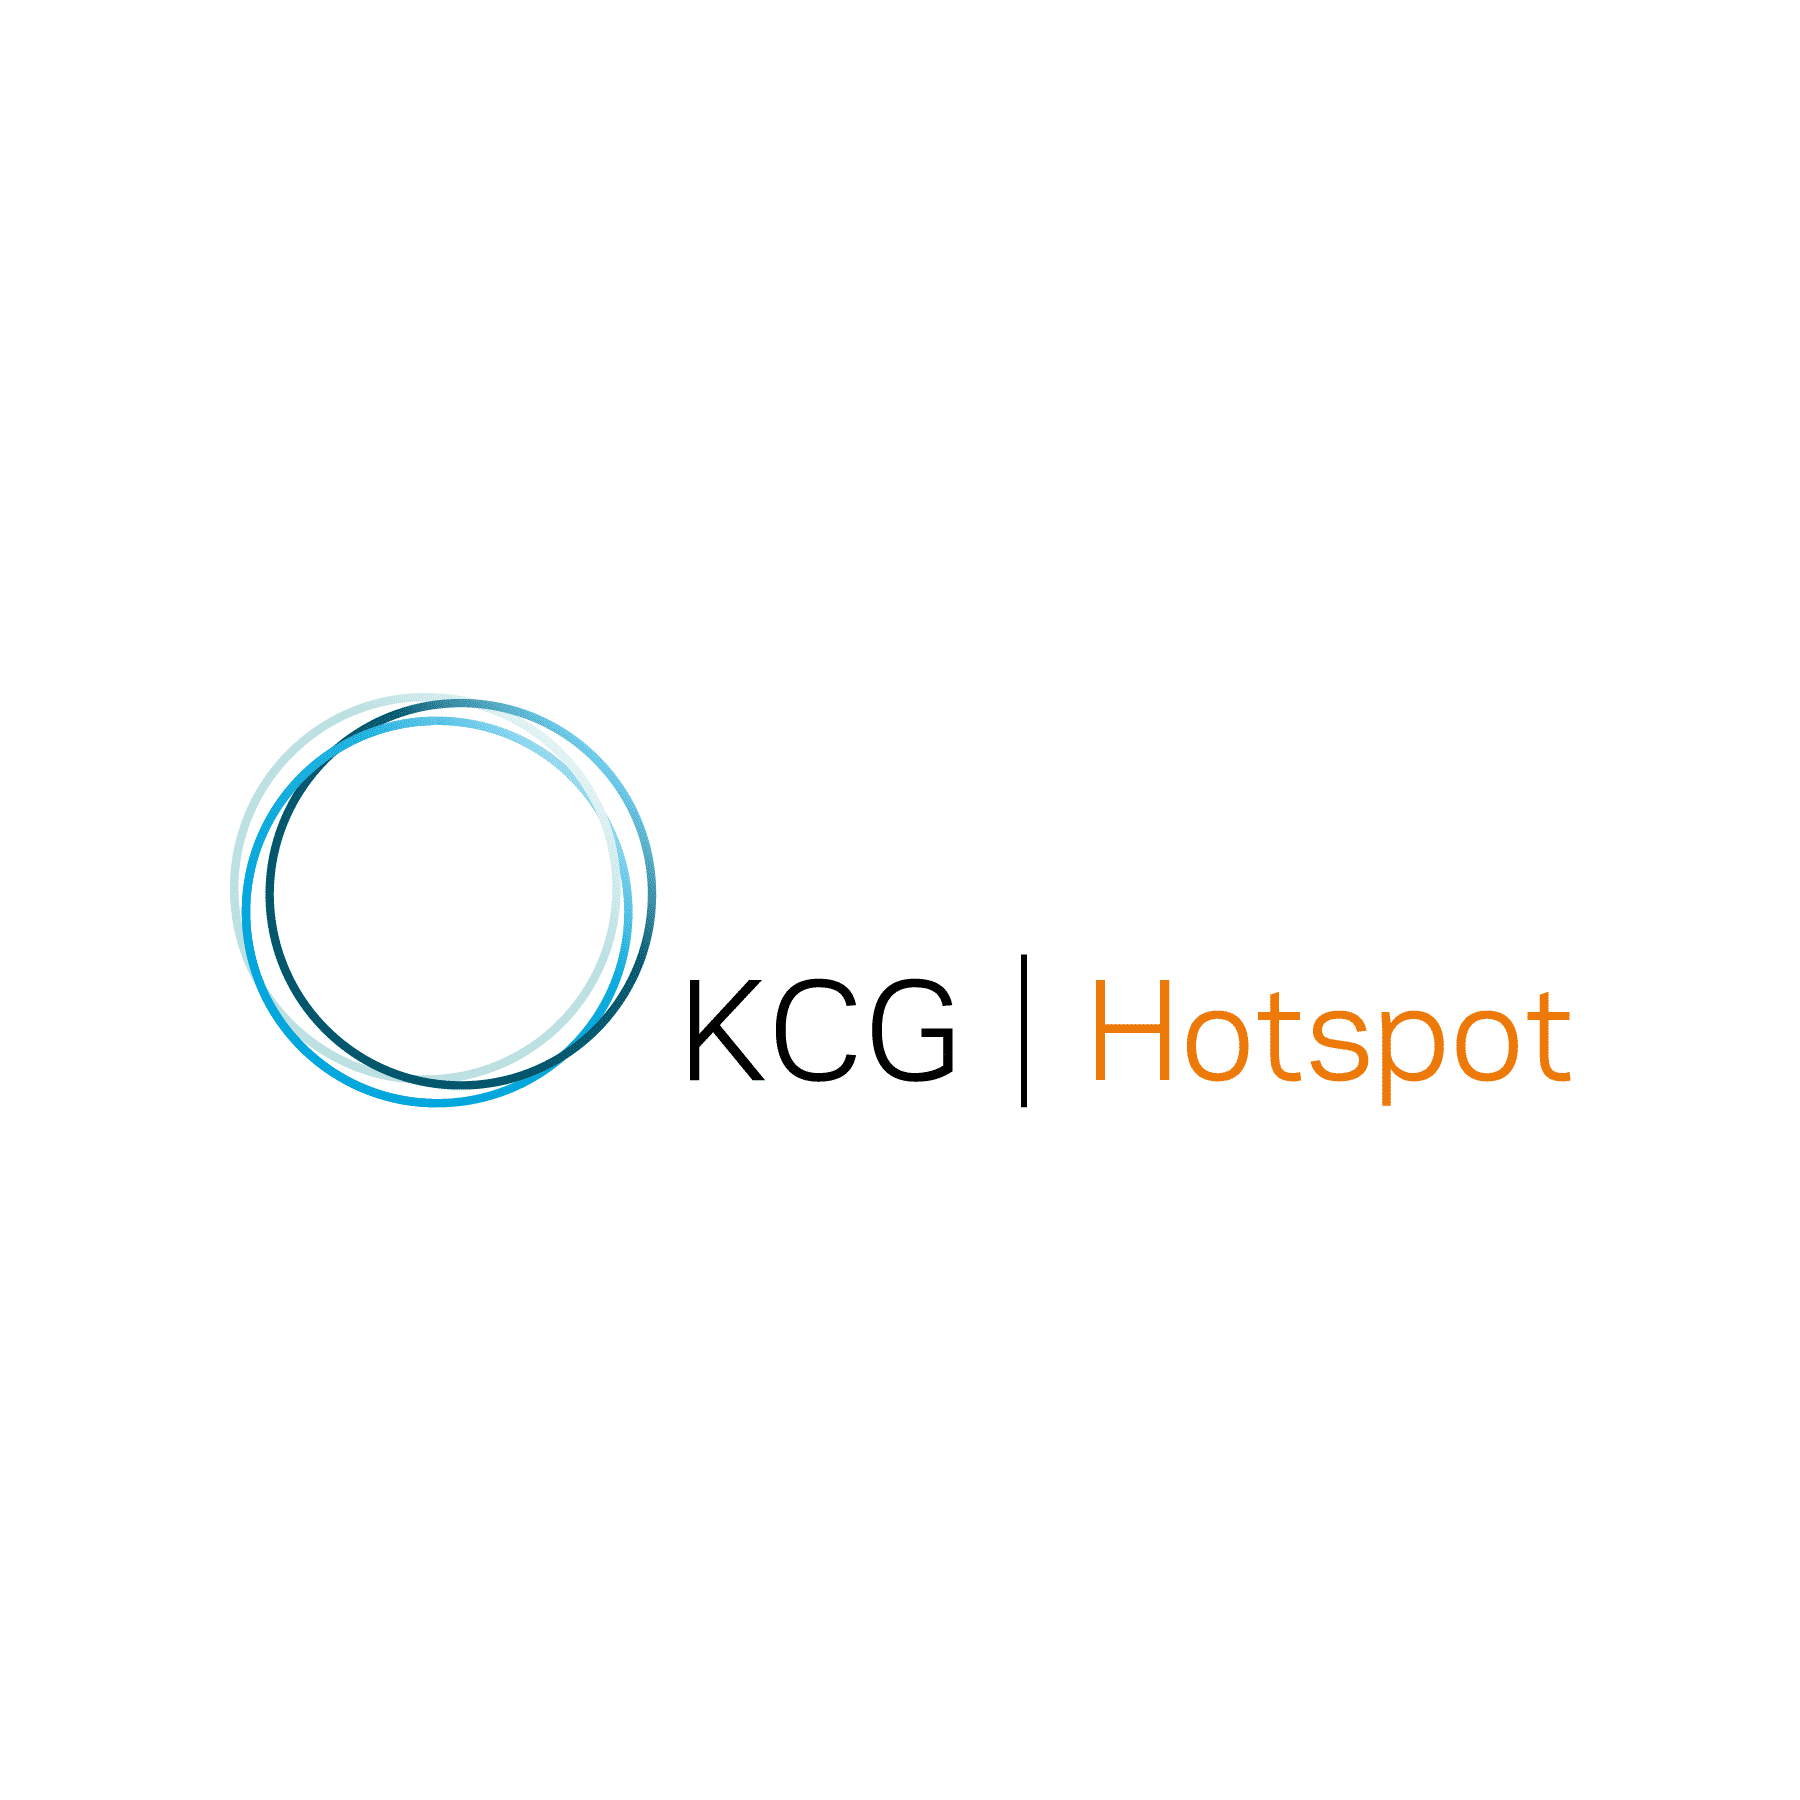 KCG Hotspot Volumes Remain Upbeat in October with Potential Sale Rumoured